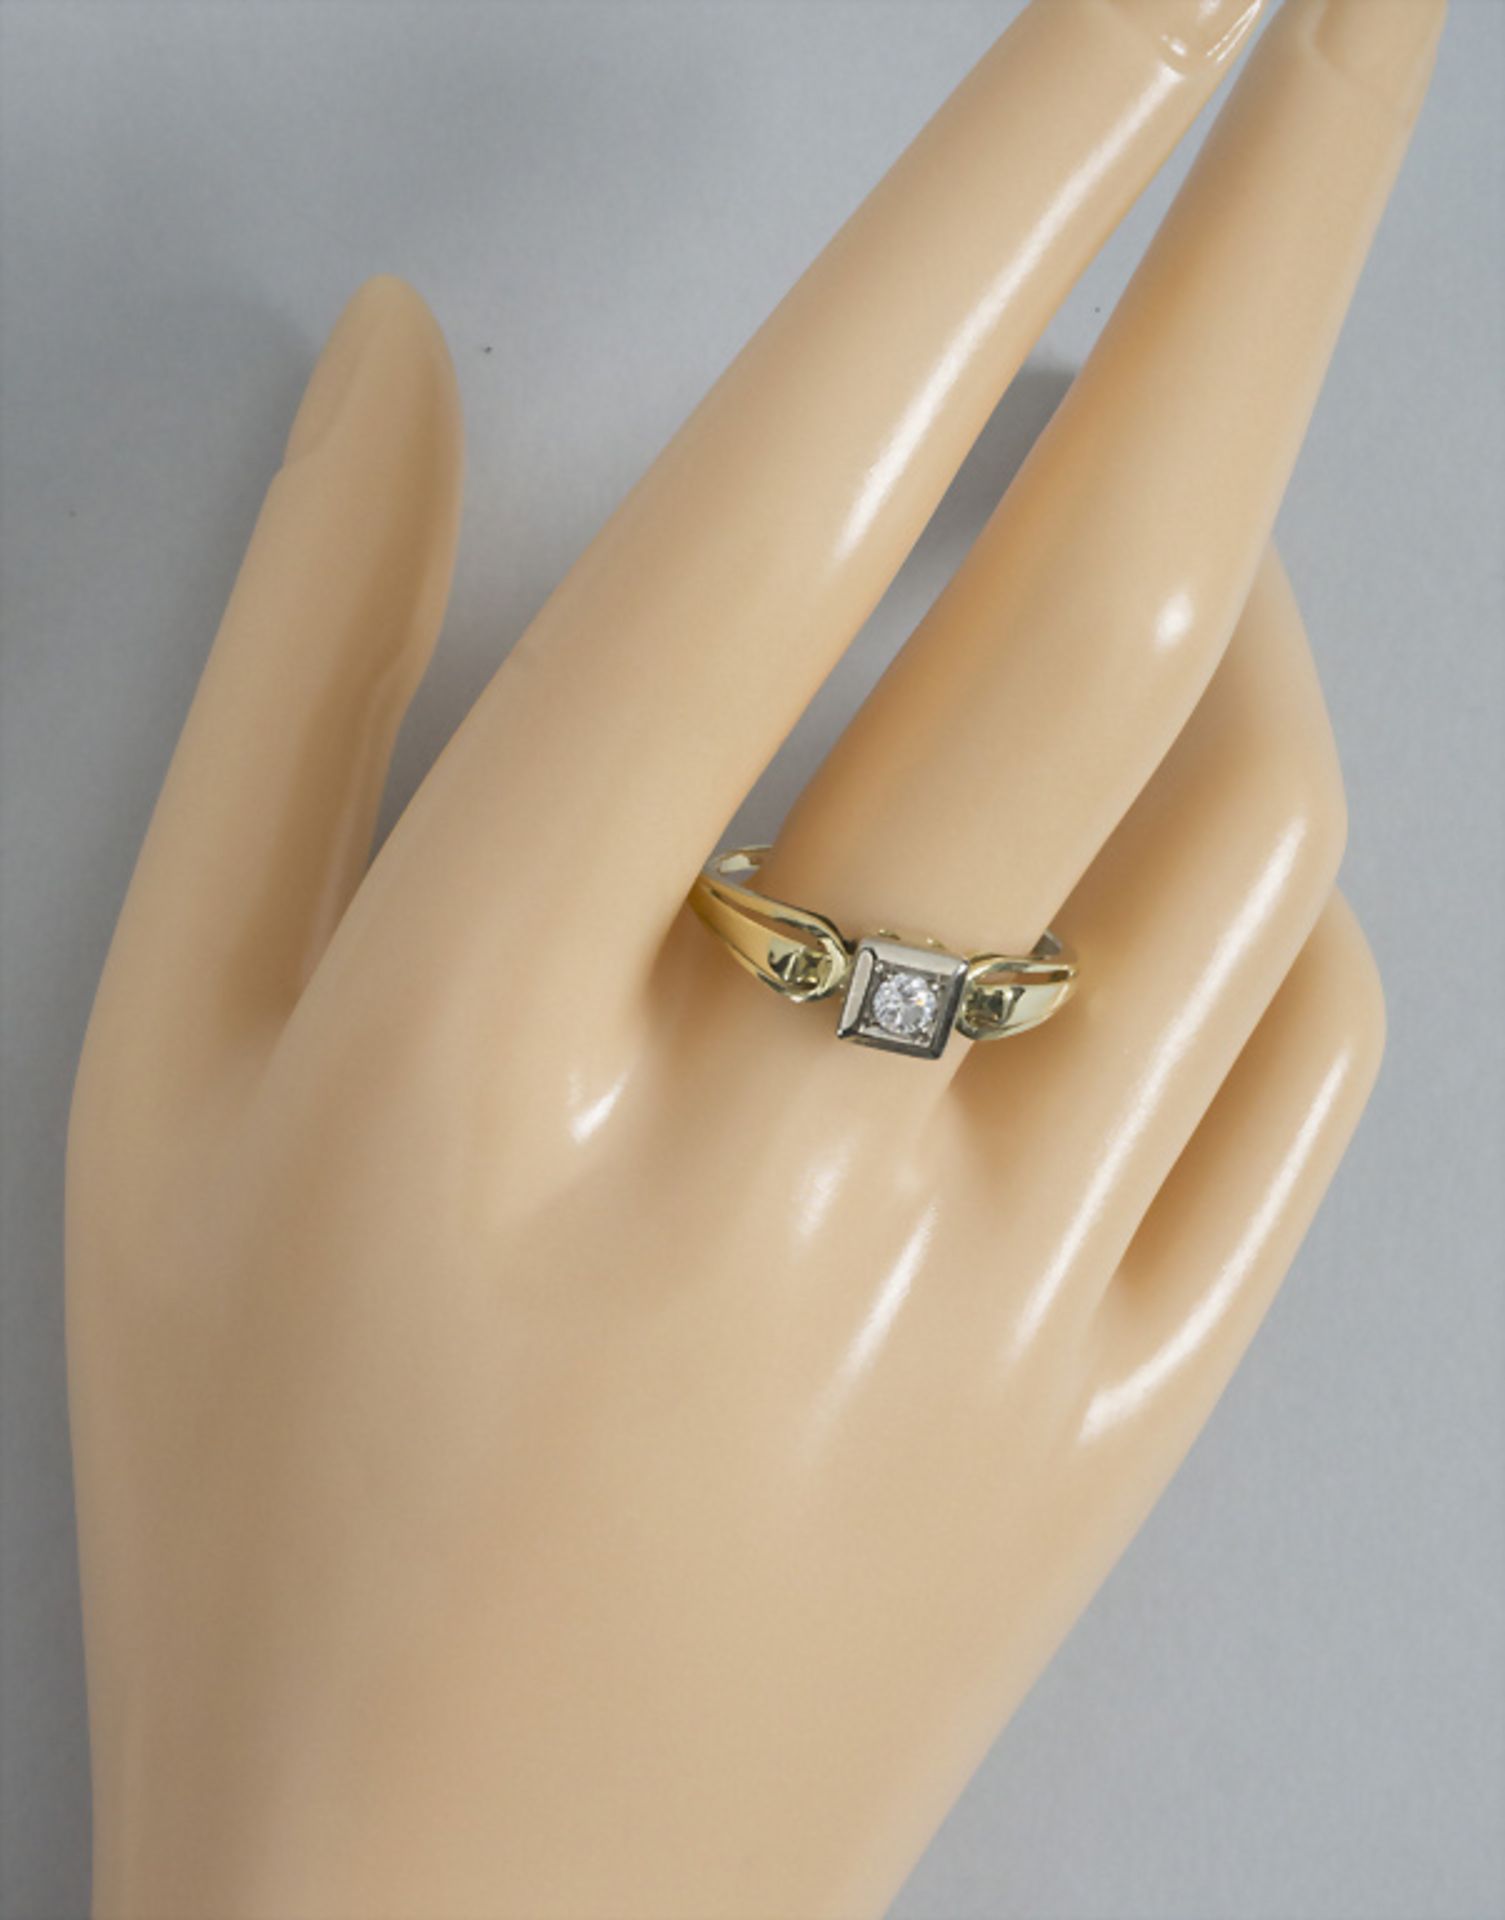 Brillant Solitärring / A 14k gold ring with a brilliant solitaire - Image 4 of 5